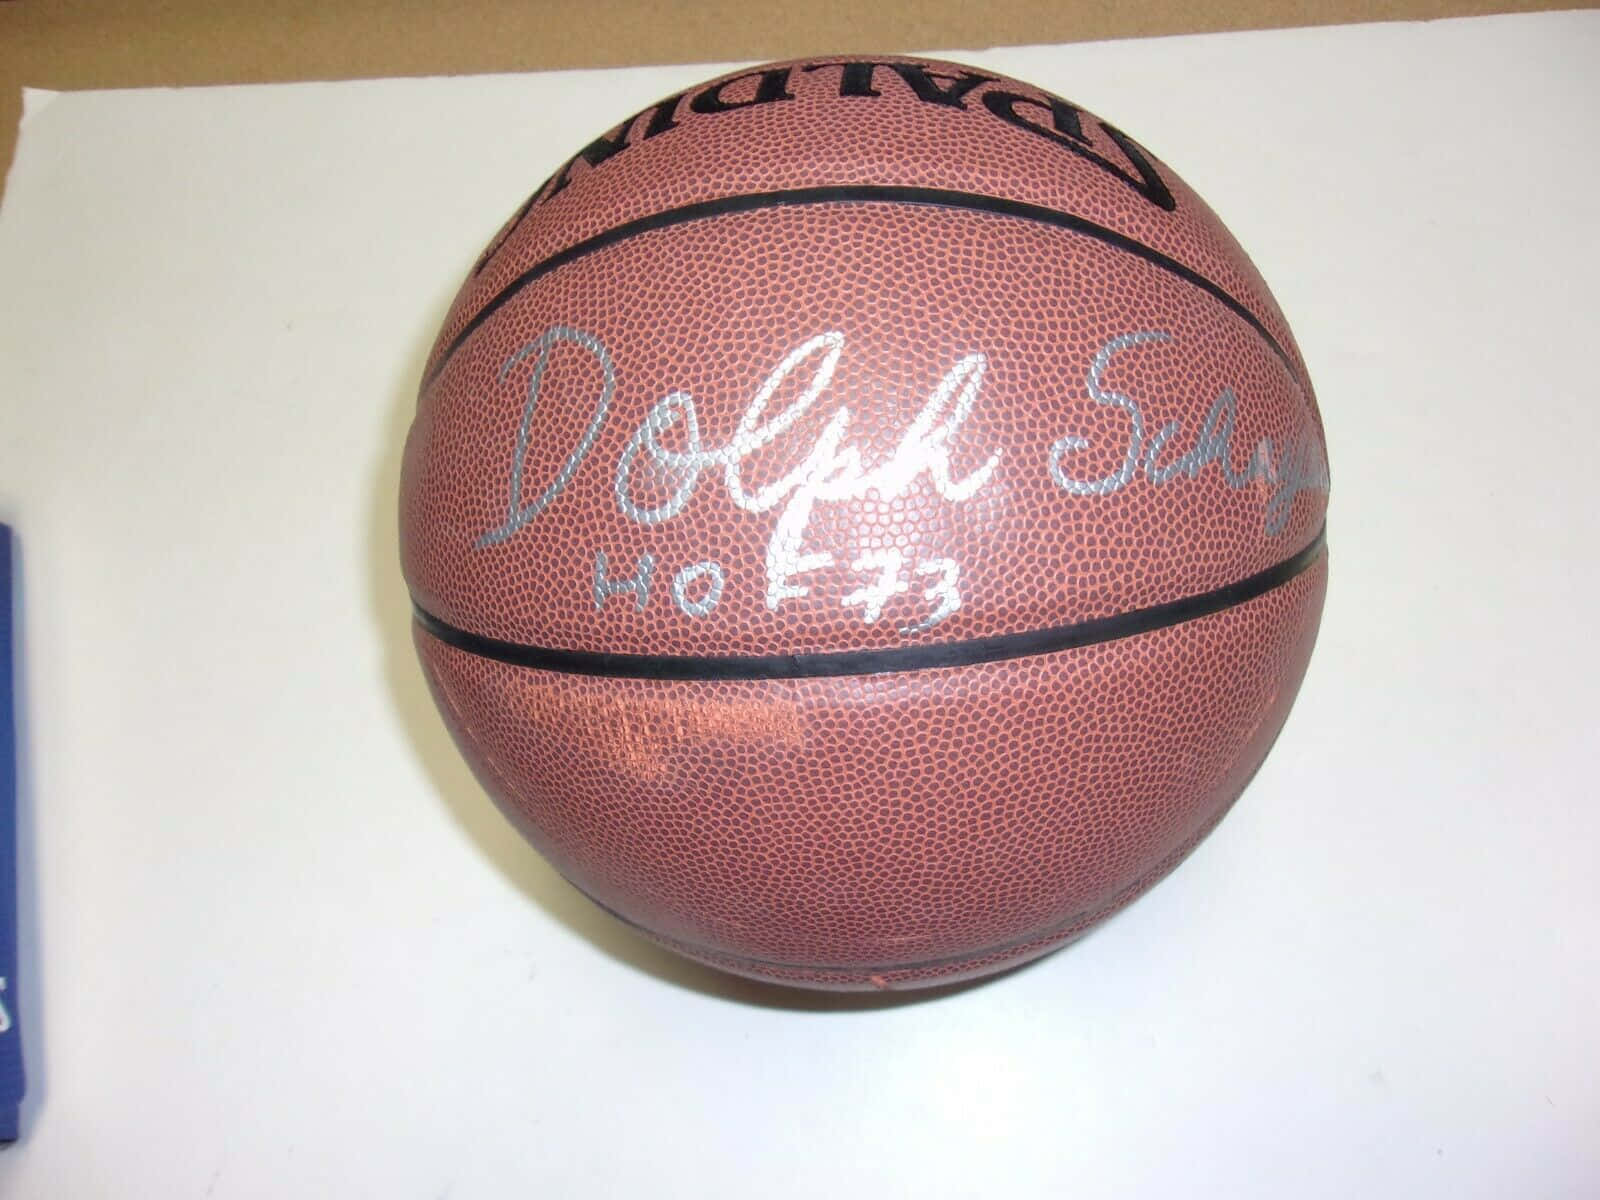 Dolph Schayes Signed Basketball Wallpaper